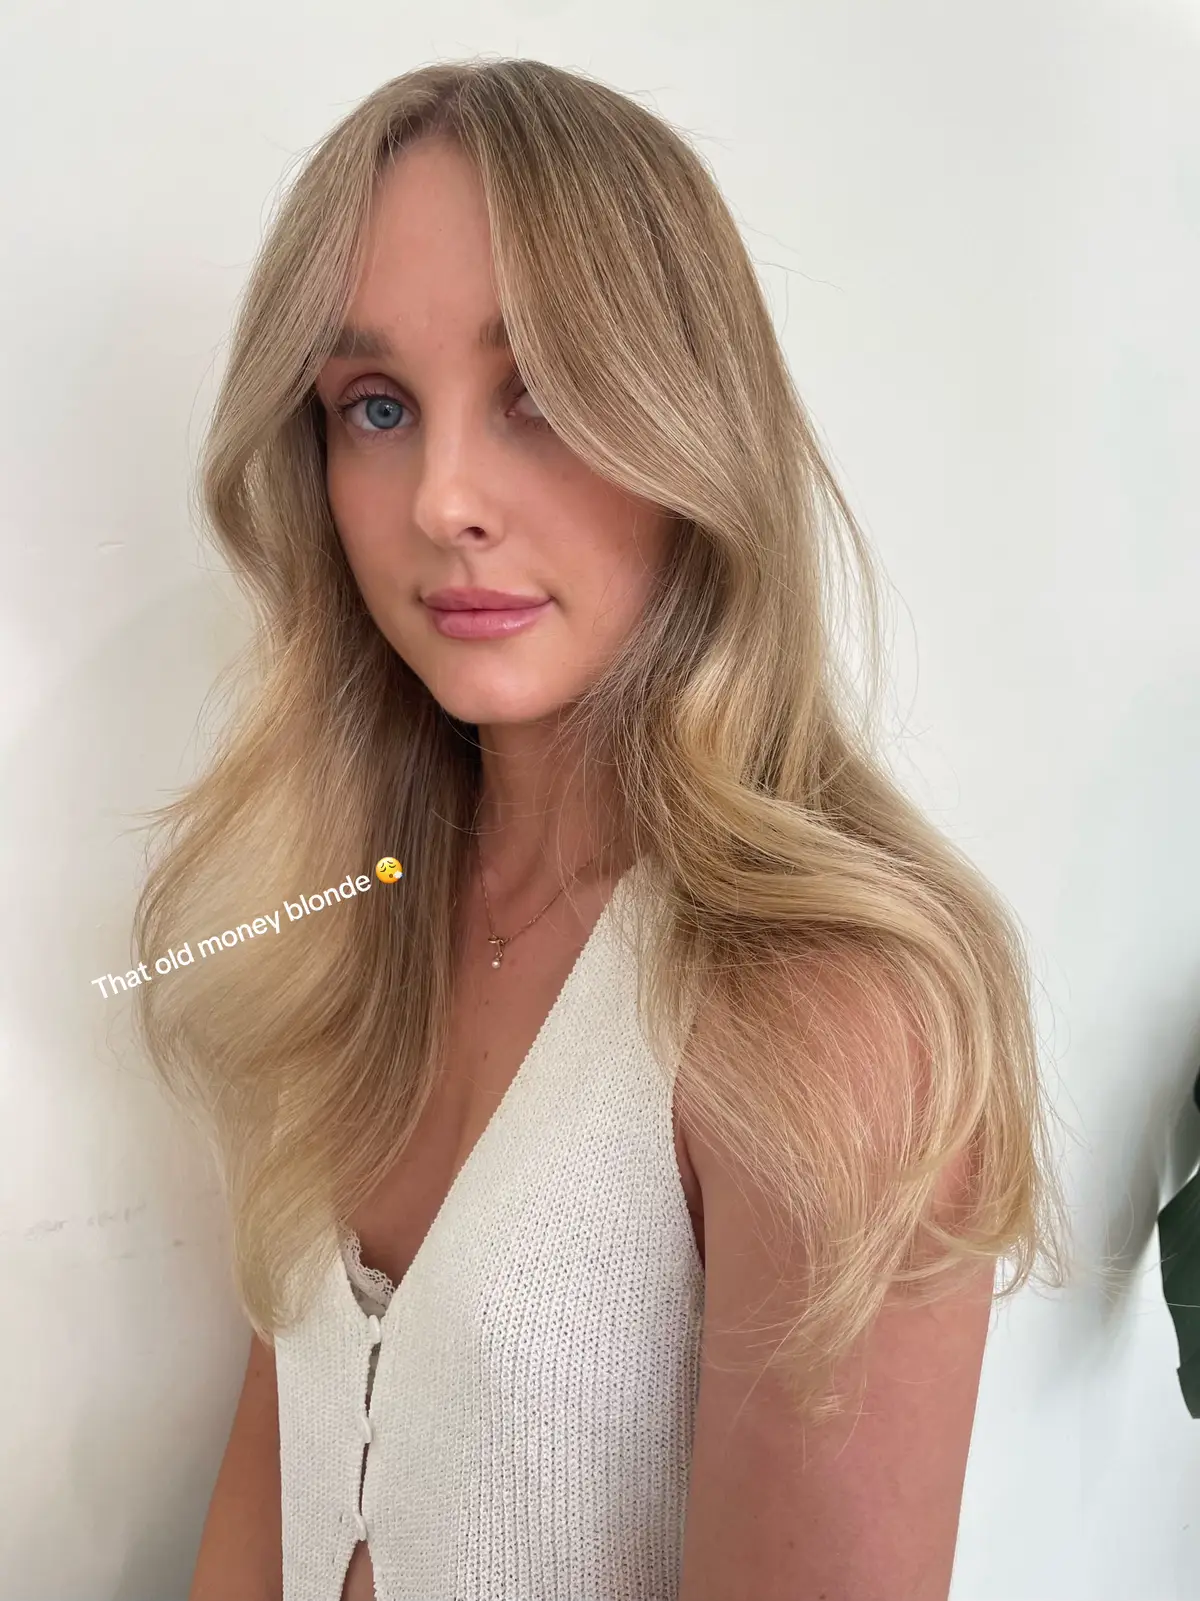 That old money blonde 😮‍💨 - #oldmoneyblonde #perthblondespecialists #perthblondes #blondelife #haristylistfremantle #fremantlebeauty Blonde Specialists Fremantle Old Money Blonde